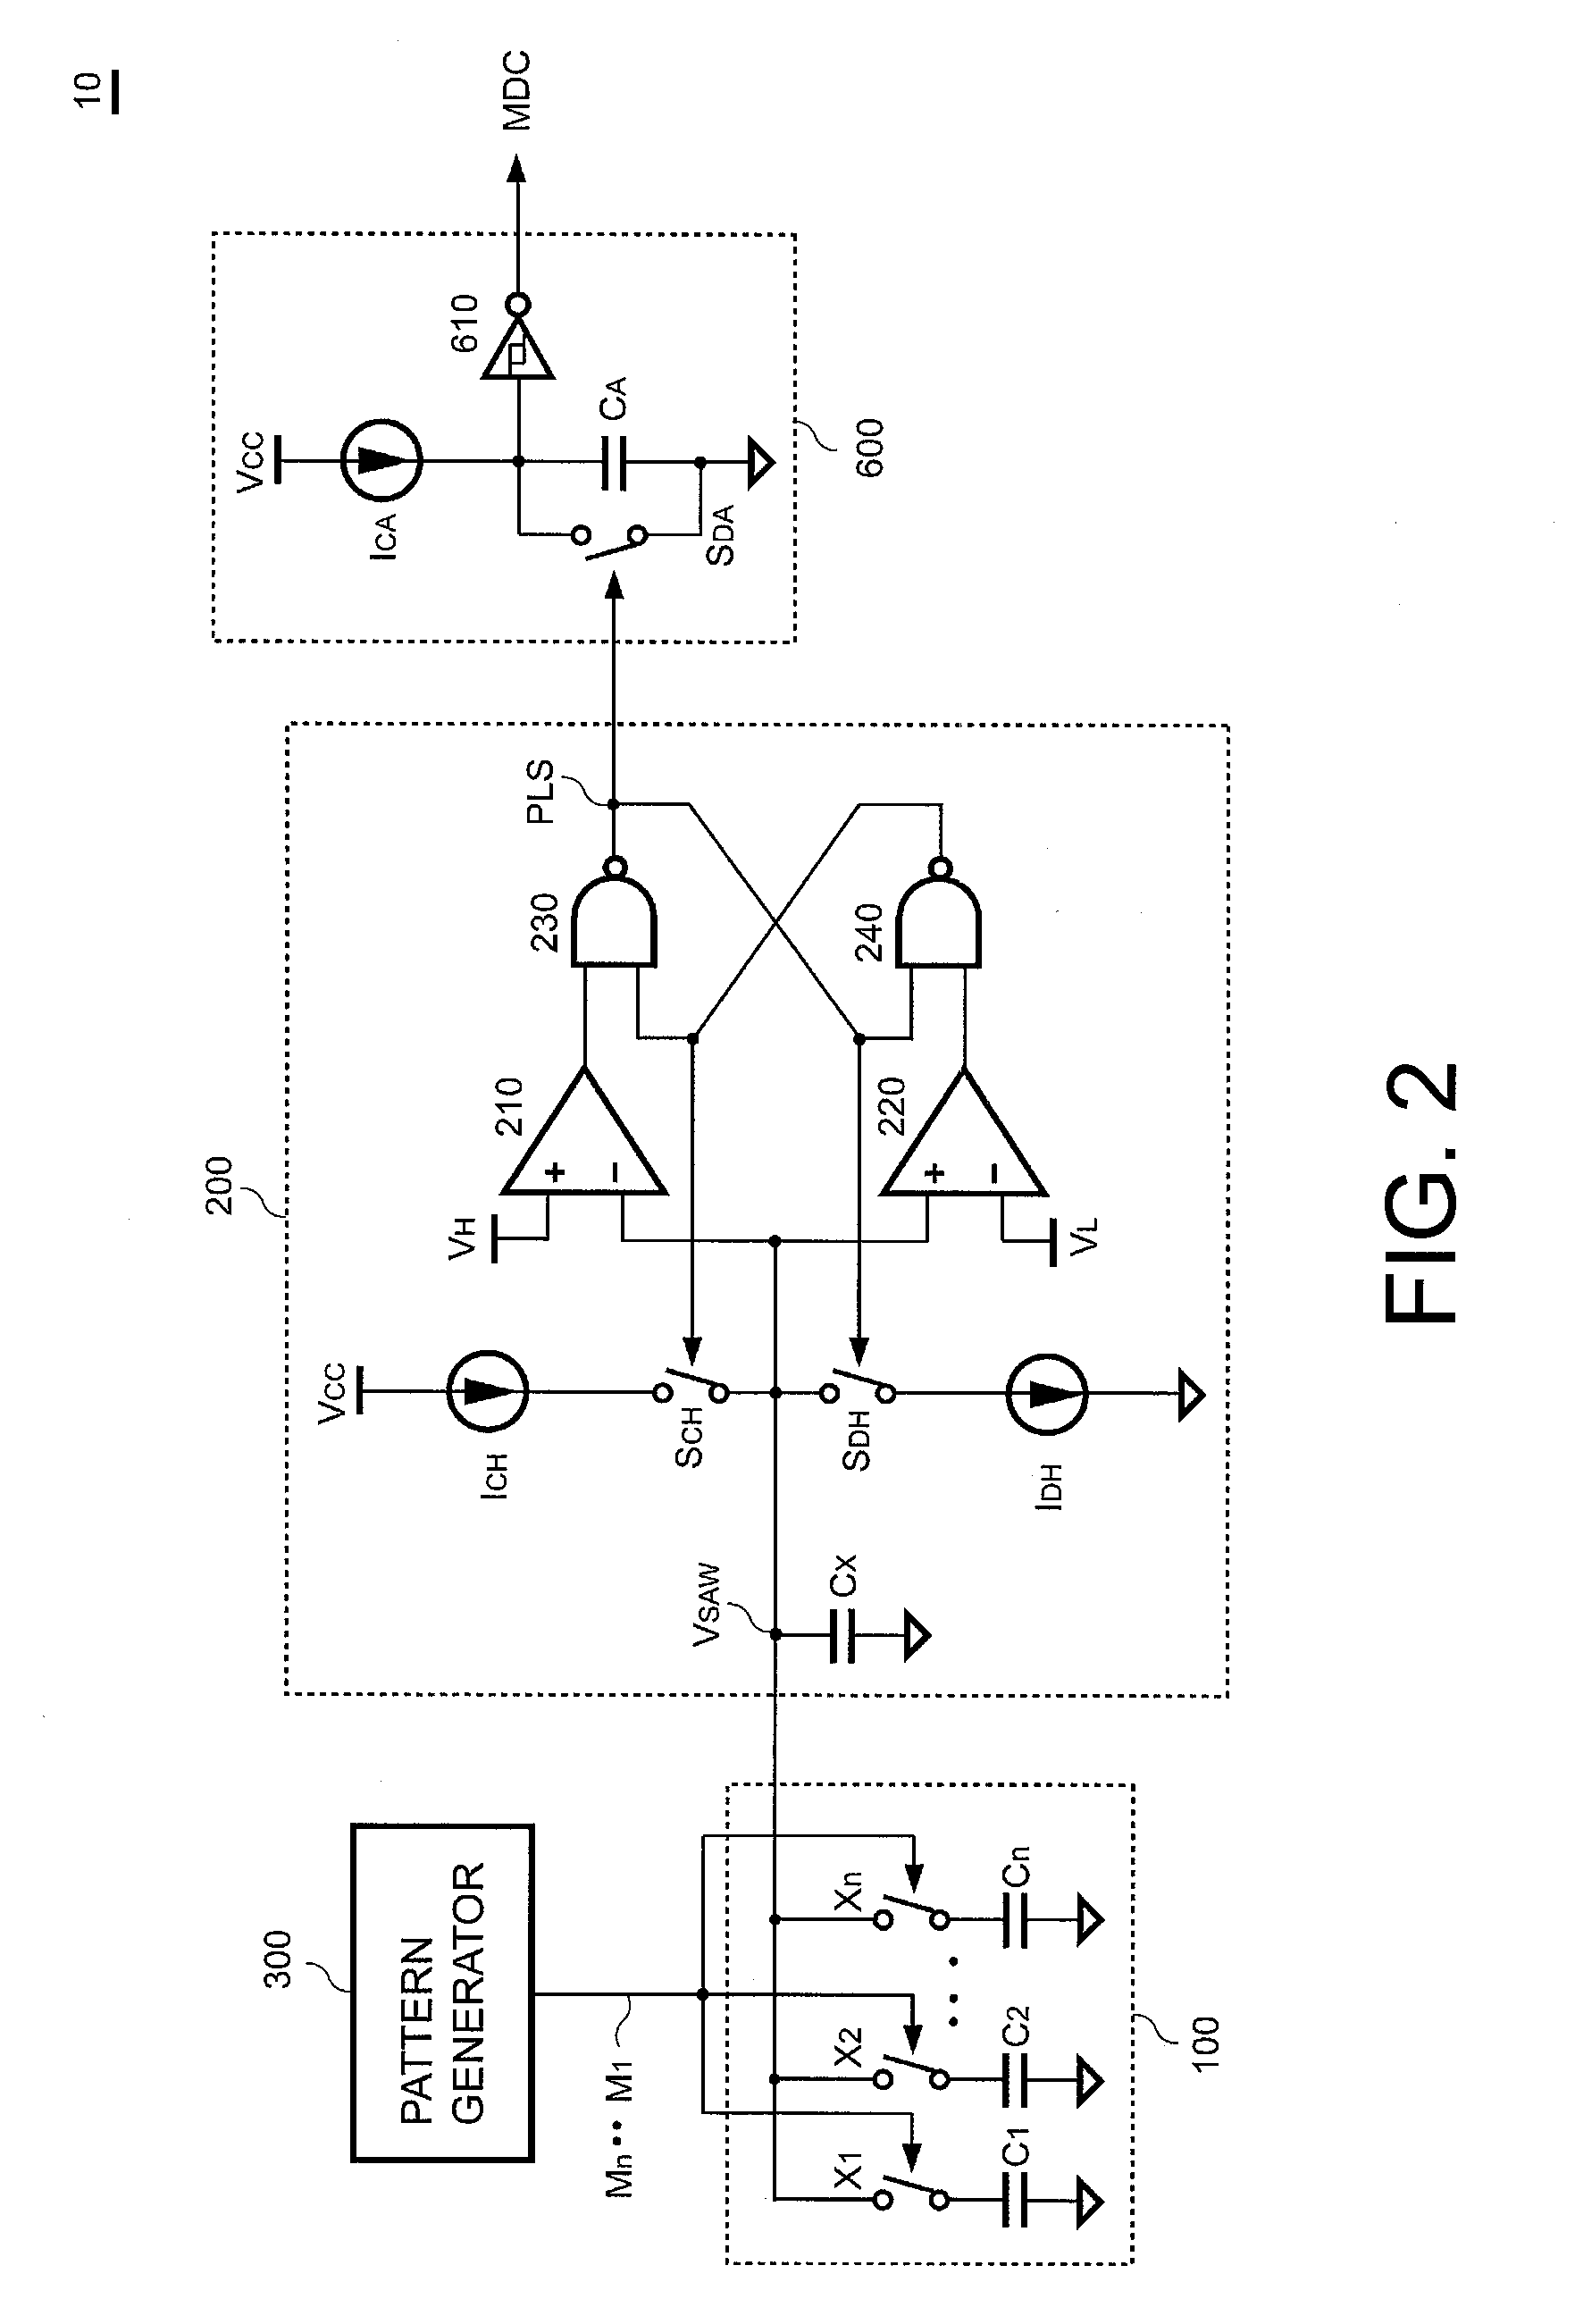 Switching controller having switching frequency hopping for power converter